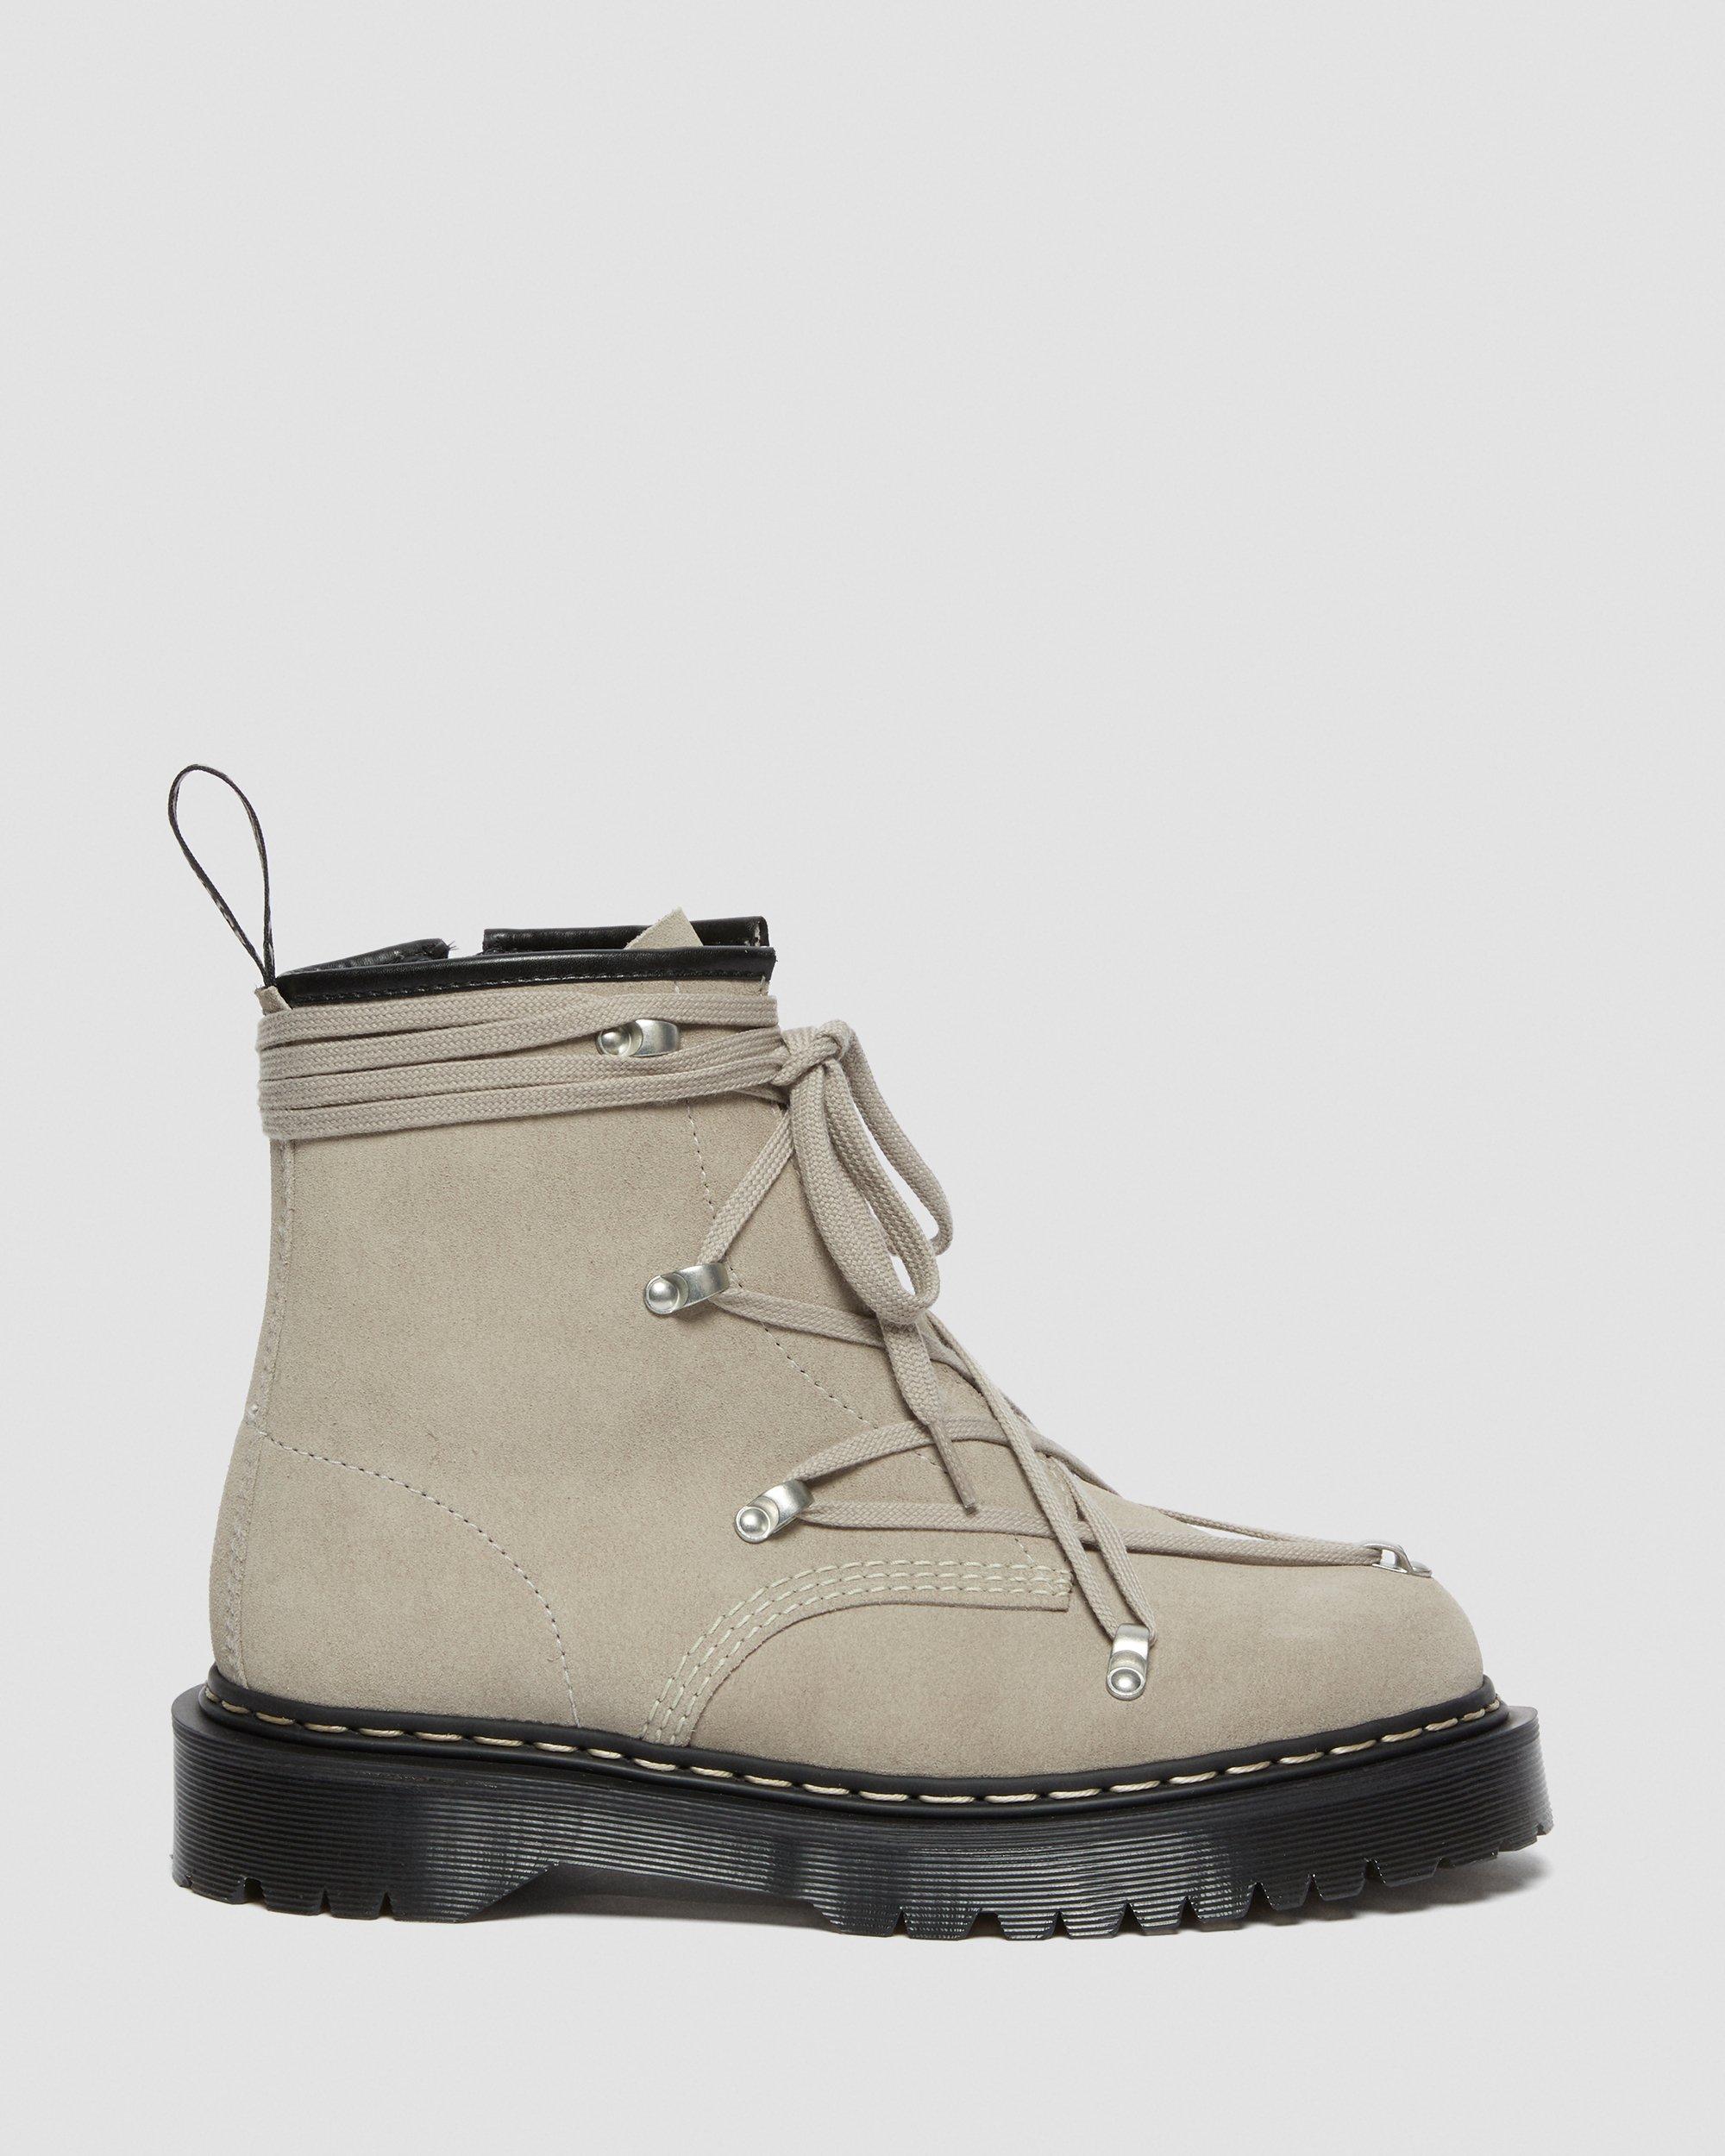 1460 Rick Owens Bex Suede Lace Up Boots in Light Taupe | Dr. Martens